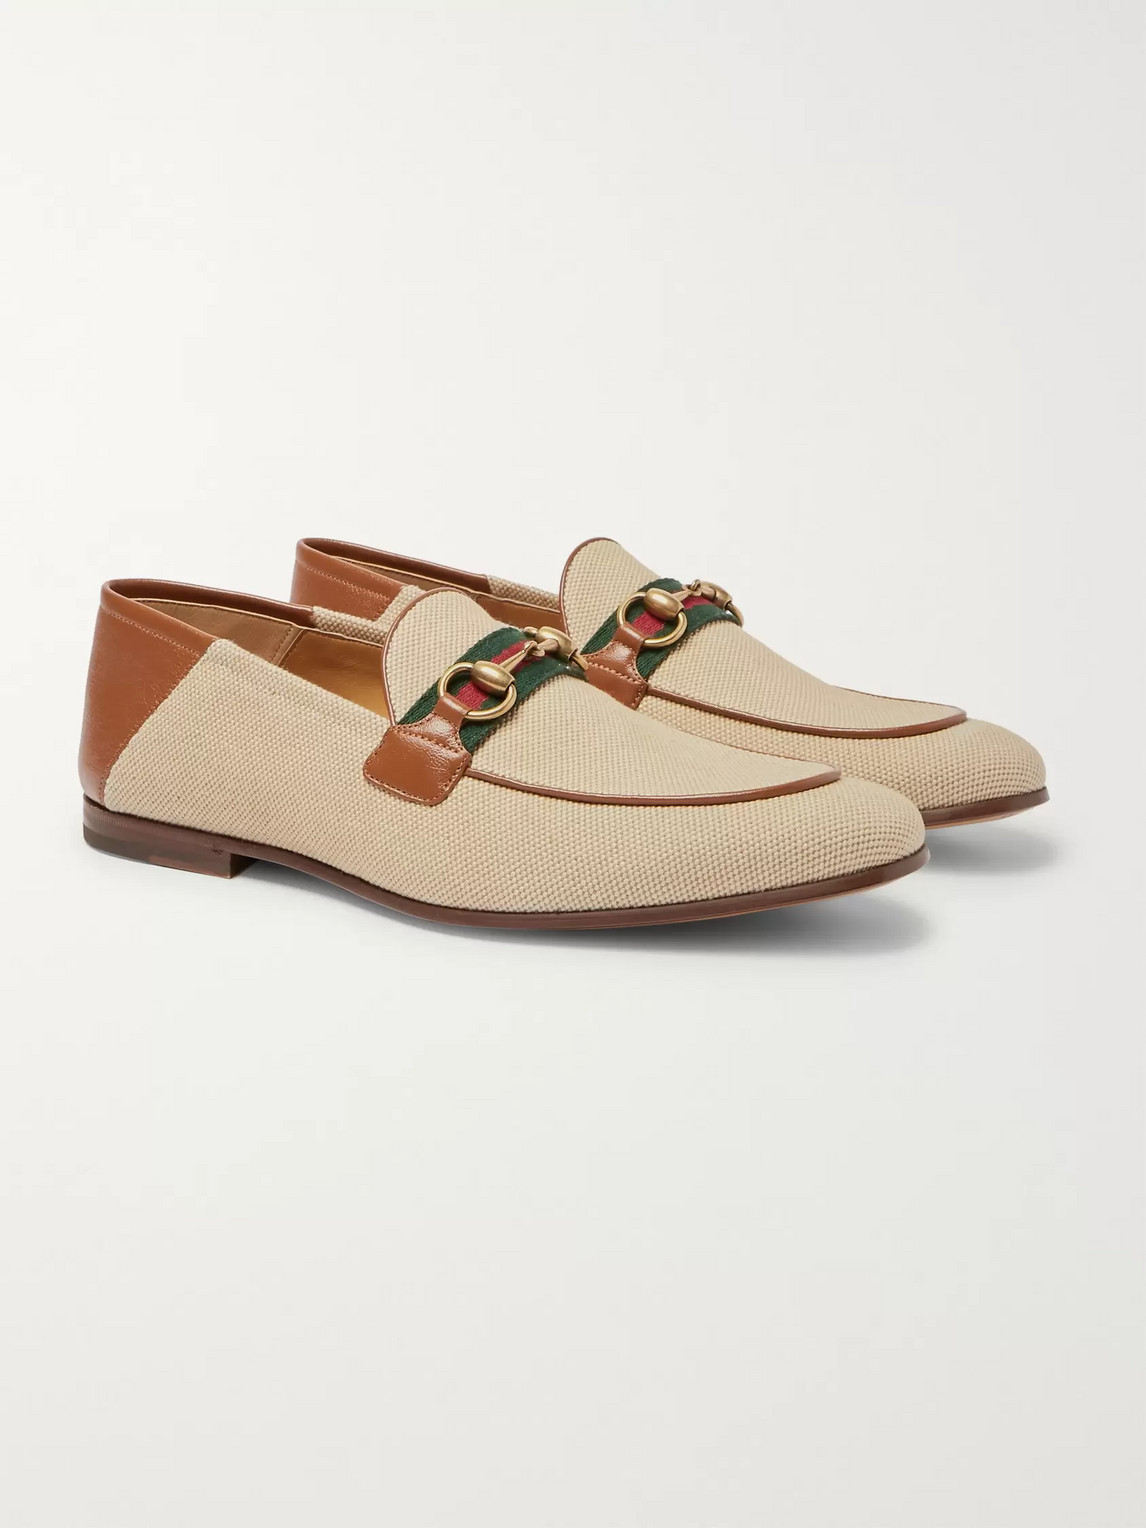 GUCCI BRIXTON WEBBING-TRIMMED HORSEBIT COLLAPSIBLE-HEEL CANVAS AND LEATHER LOAFERS